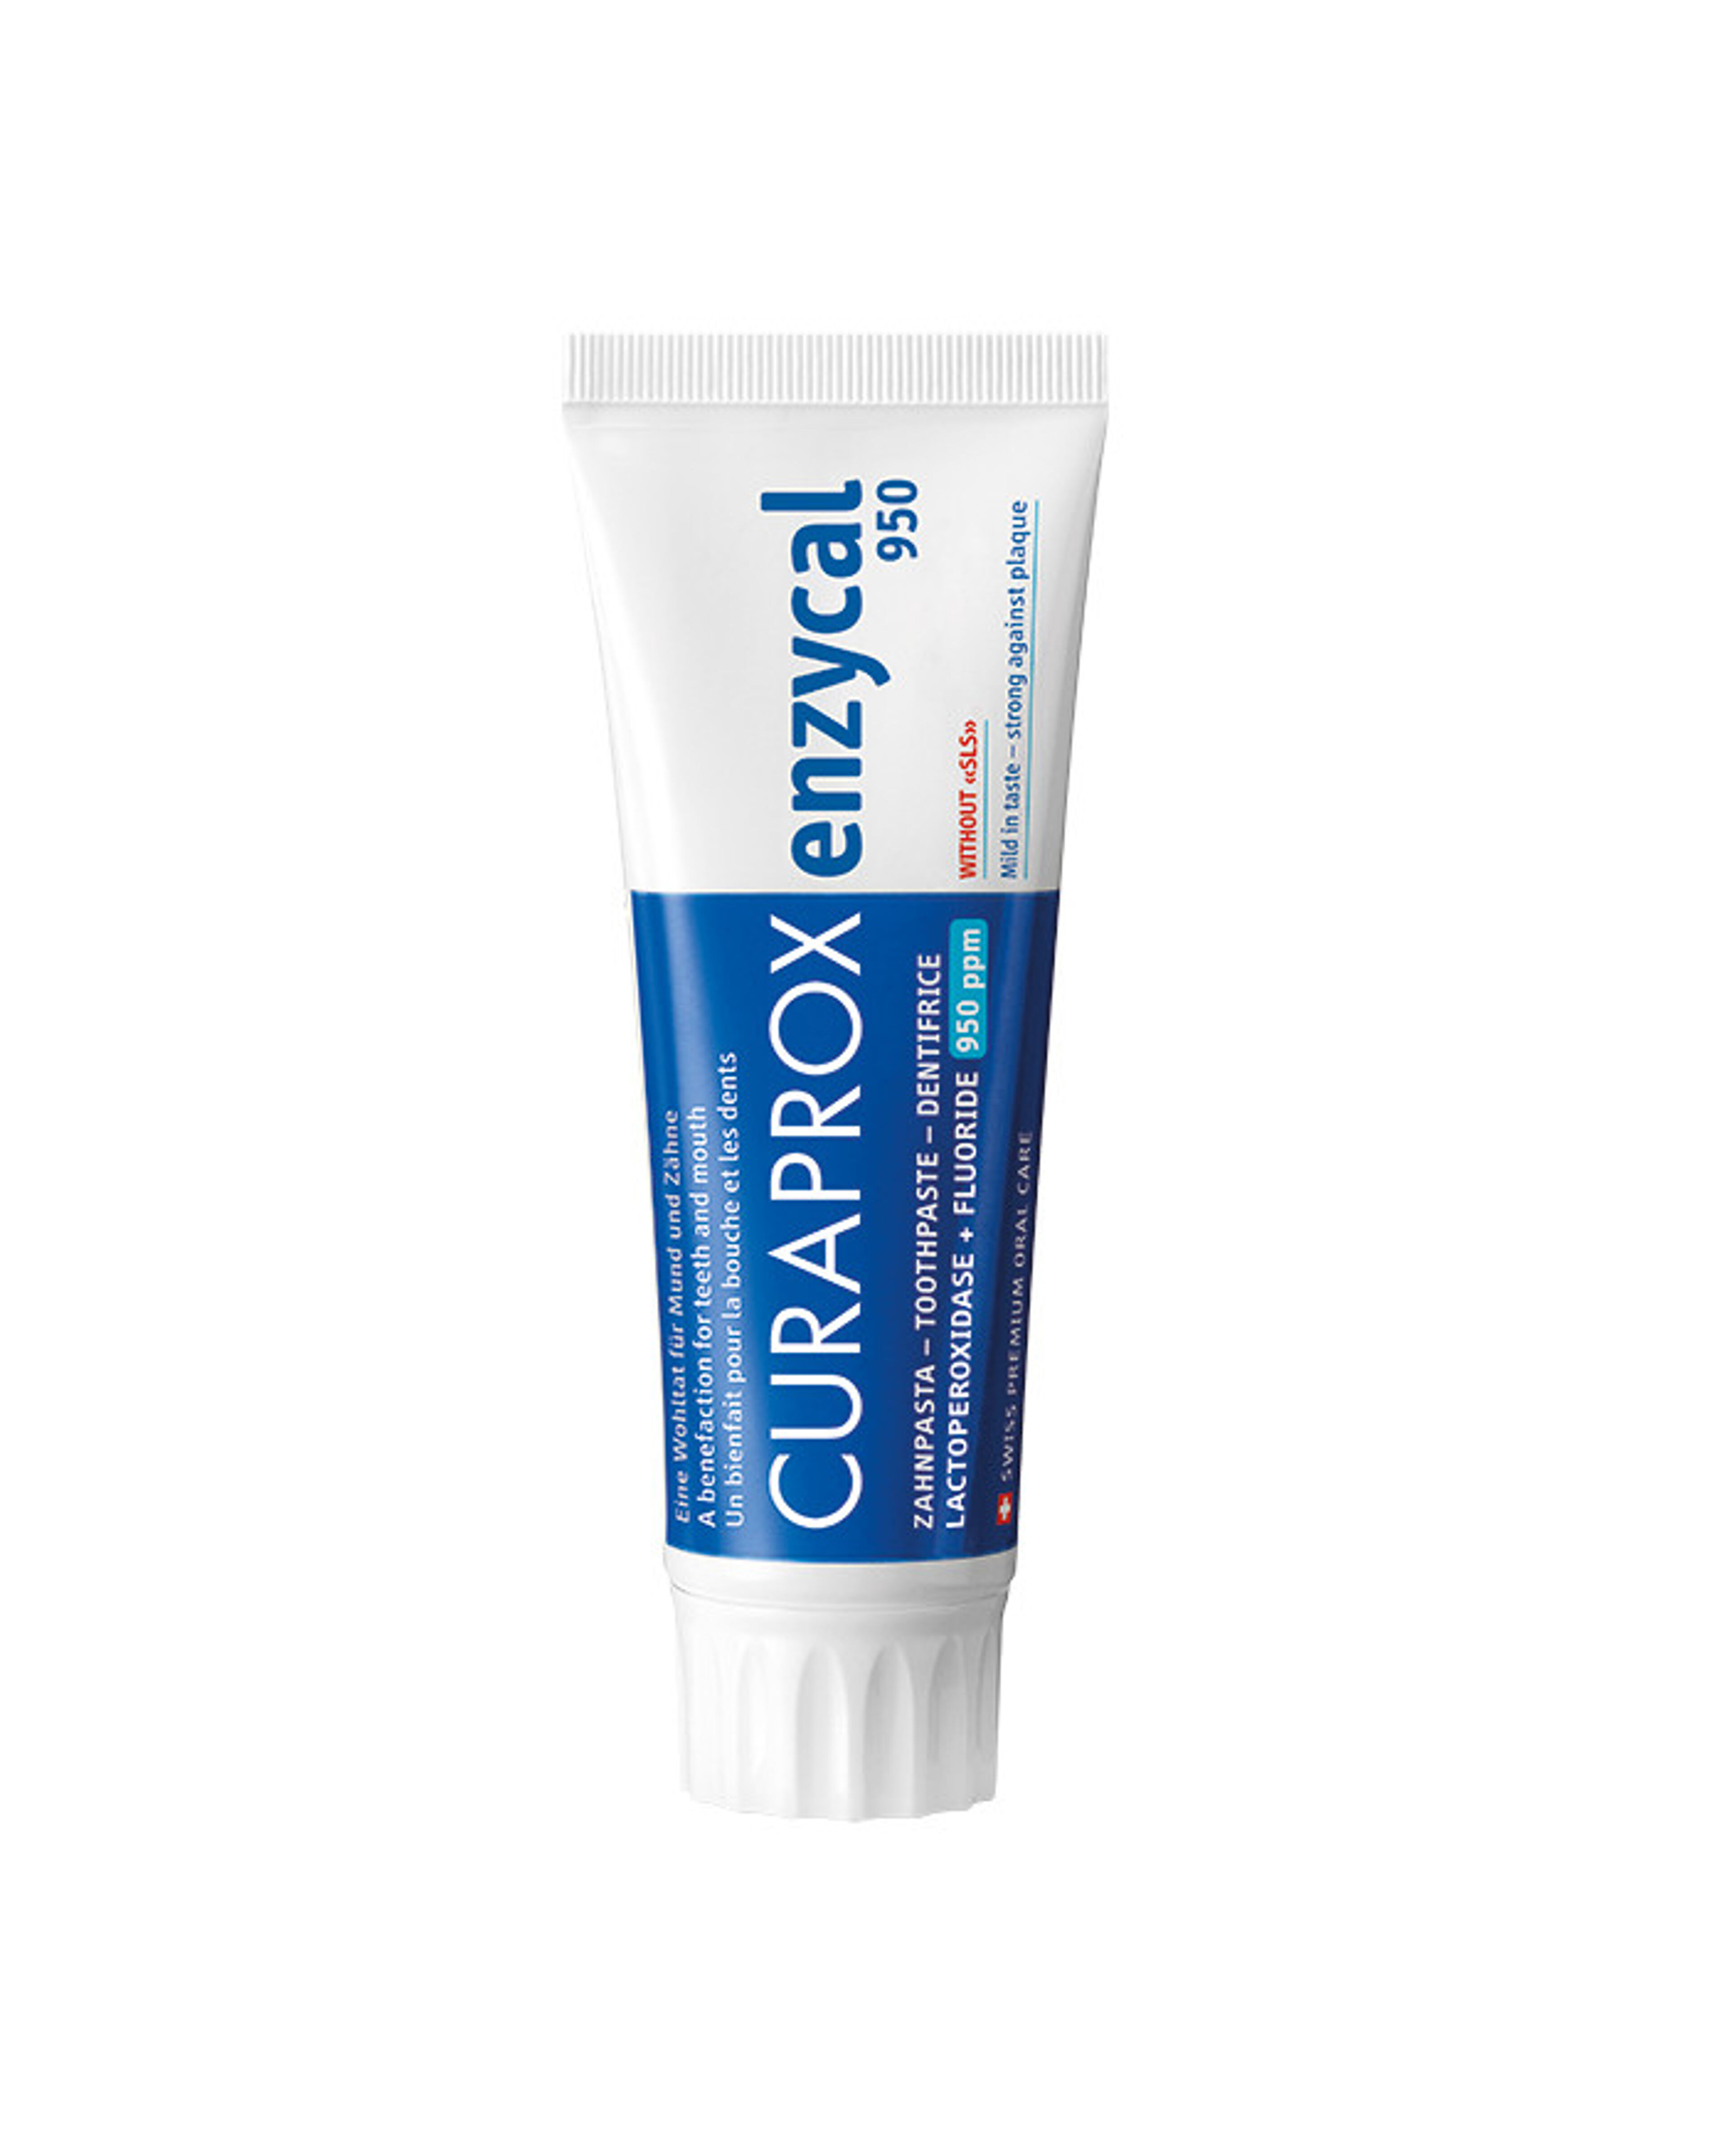 Curaprox Enzycal Dentifrice